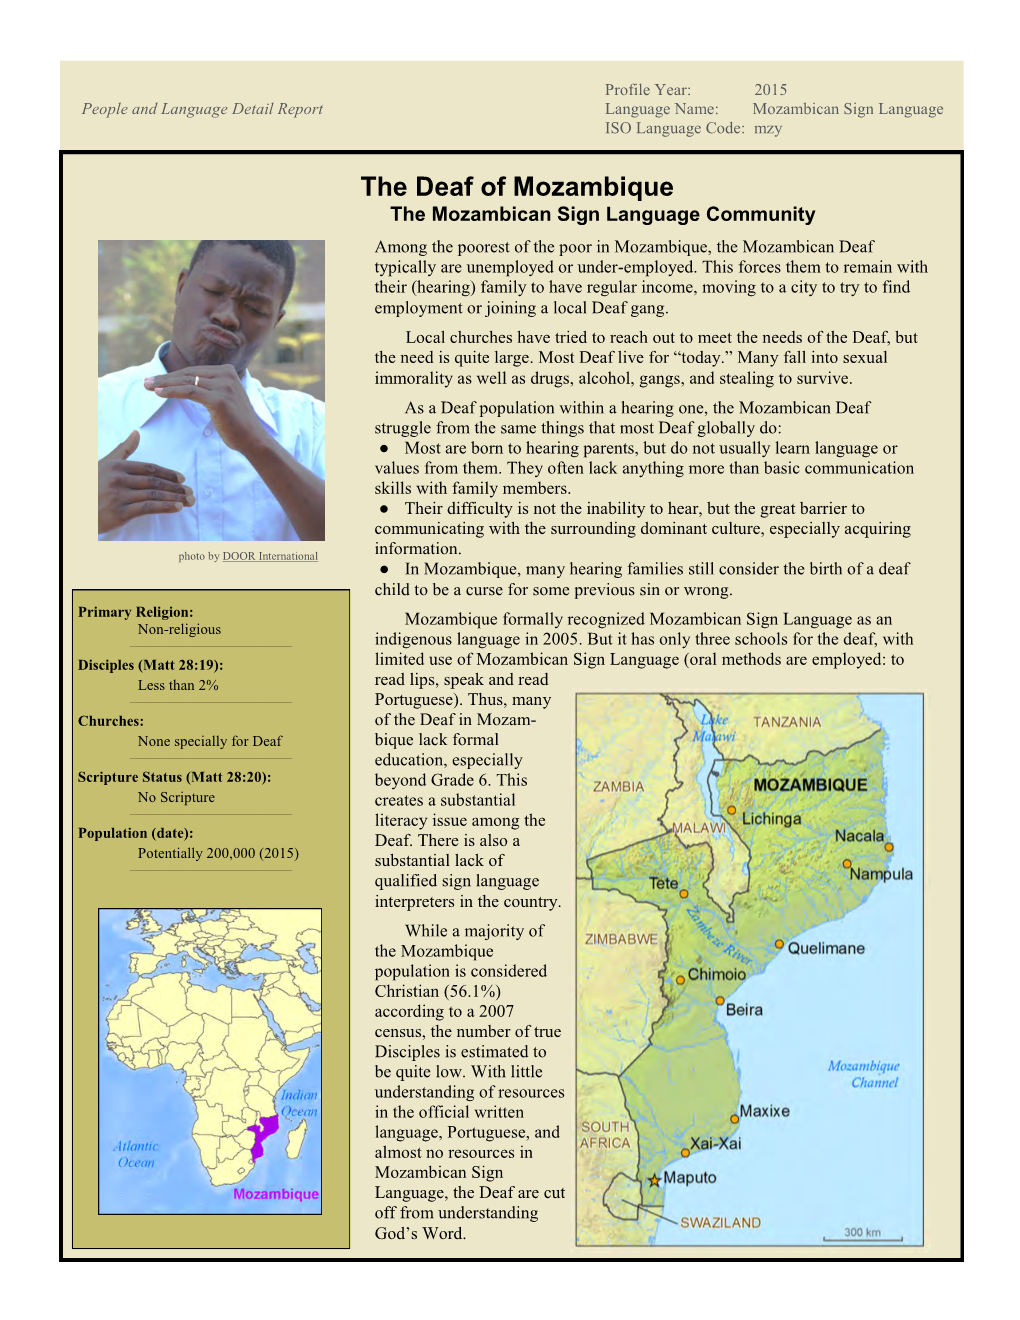 The Deaf of Mozambique